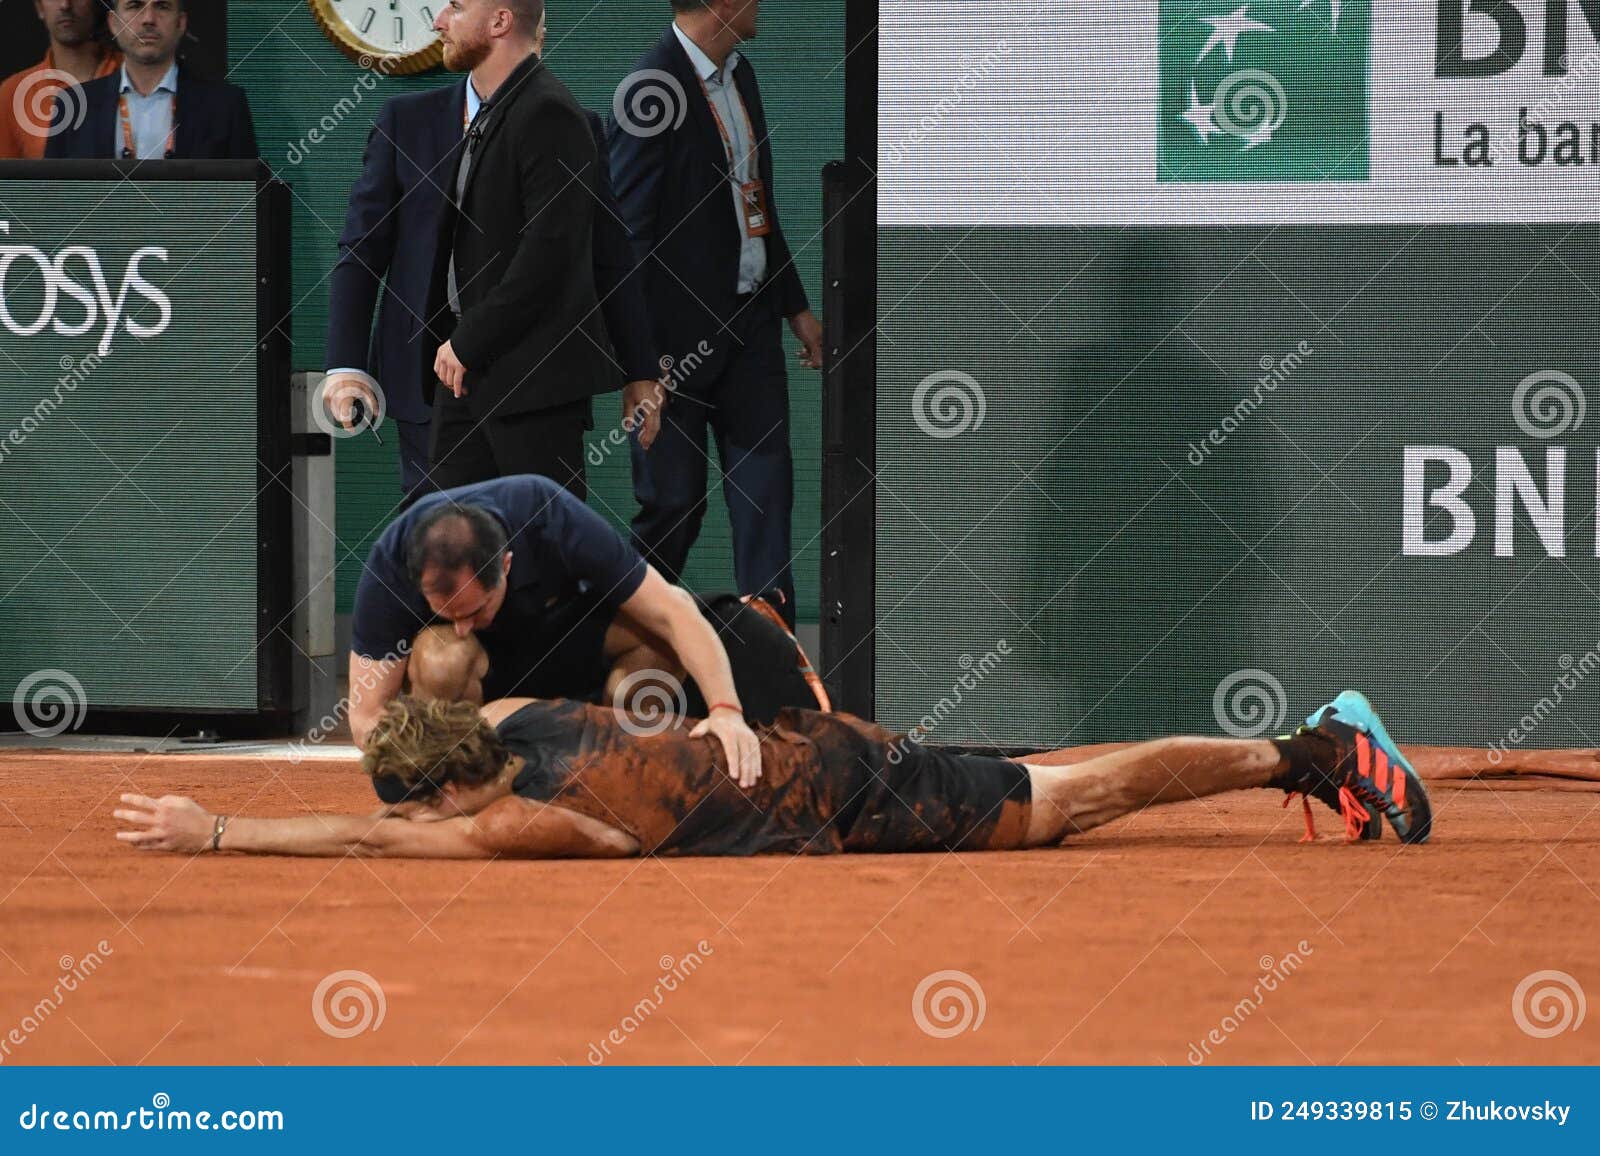 Injured Tennis Player Alexander Zverev of Germany Requires Medical Attention during His Semi-final Match Against Rafael Nadal Editorial Image 